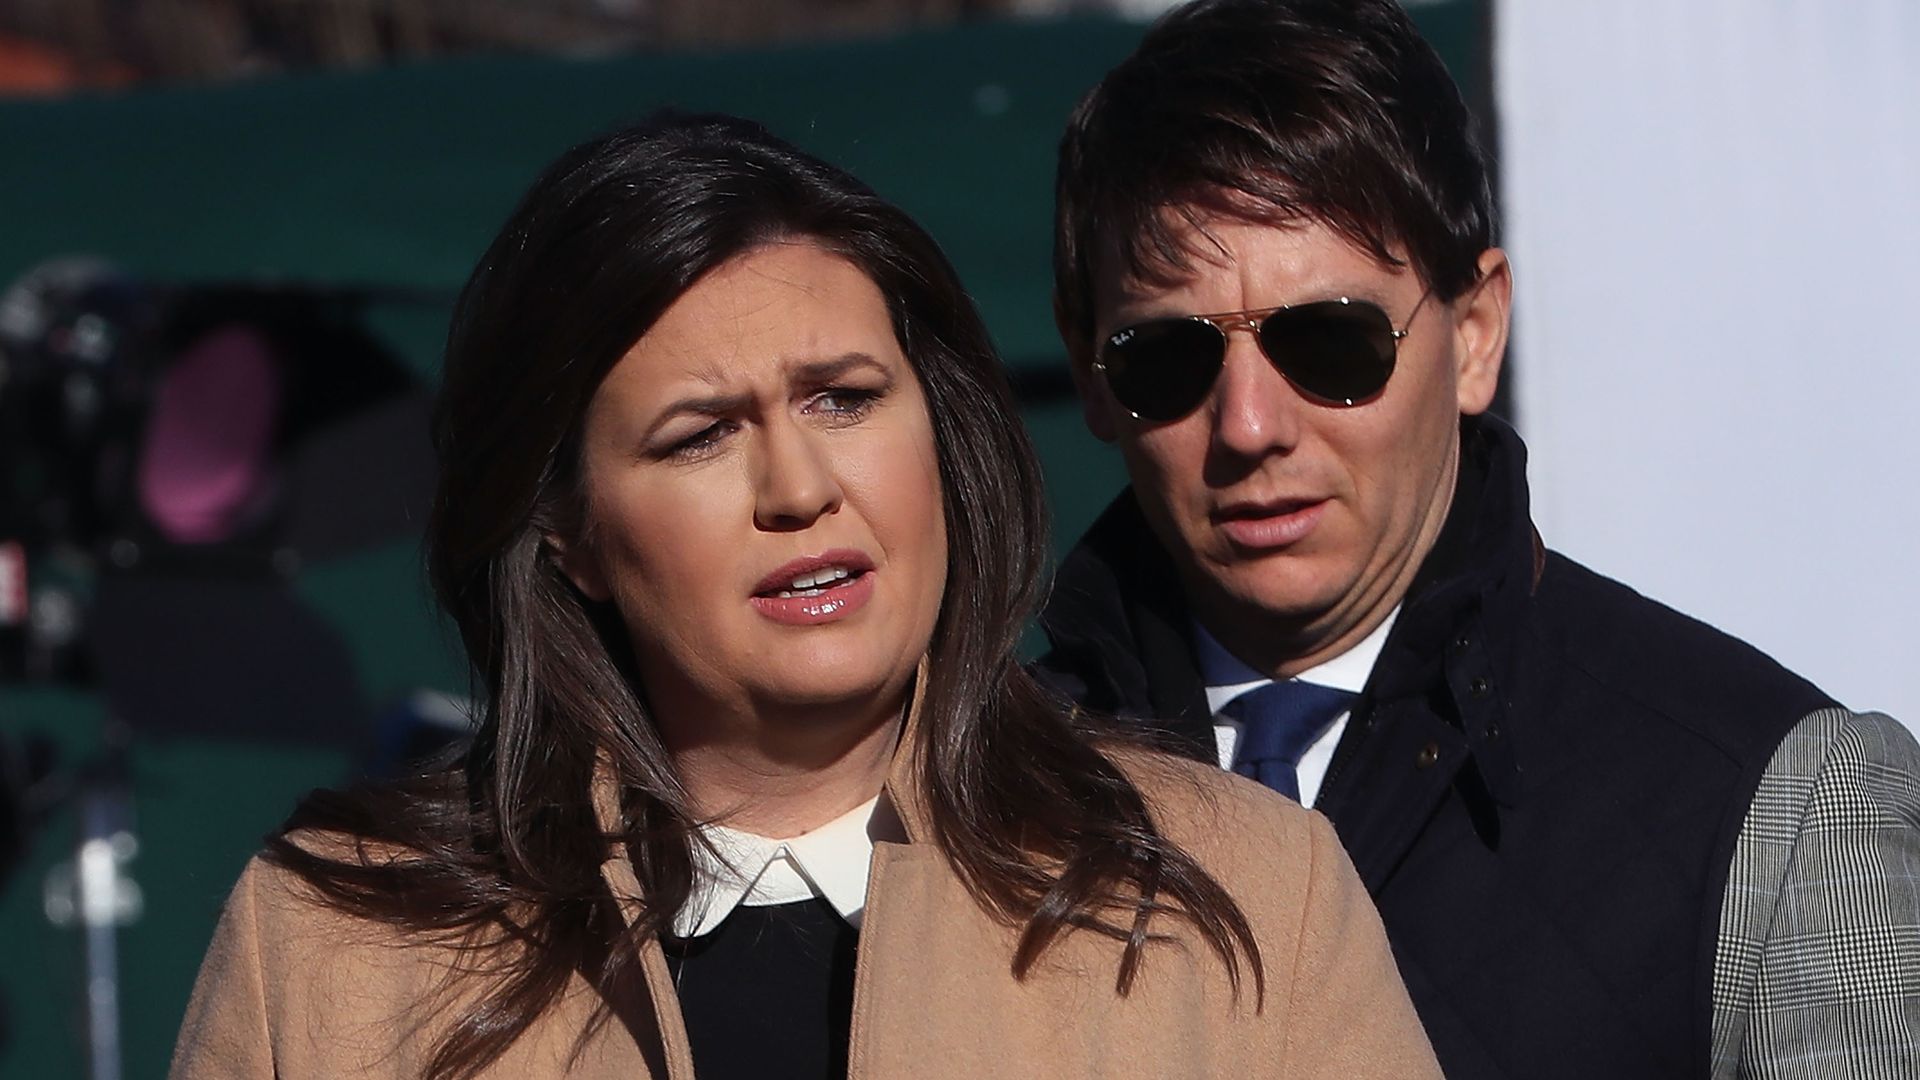 Sarah Sanders wears a quote while being interview outside the White House 